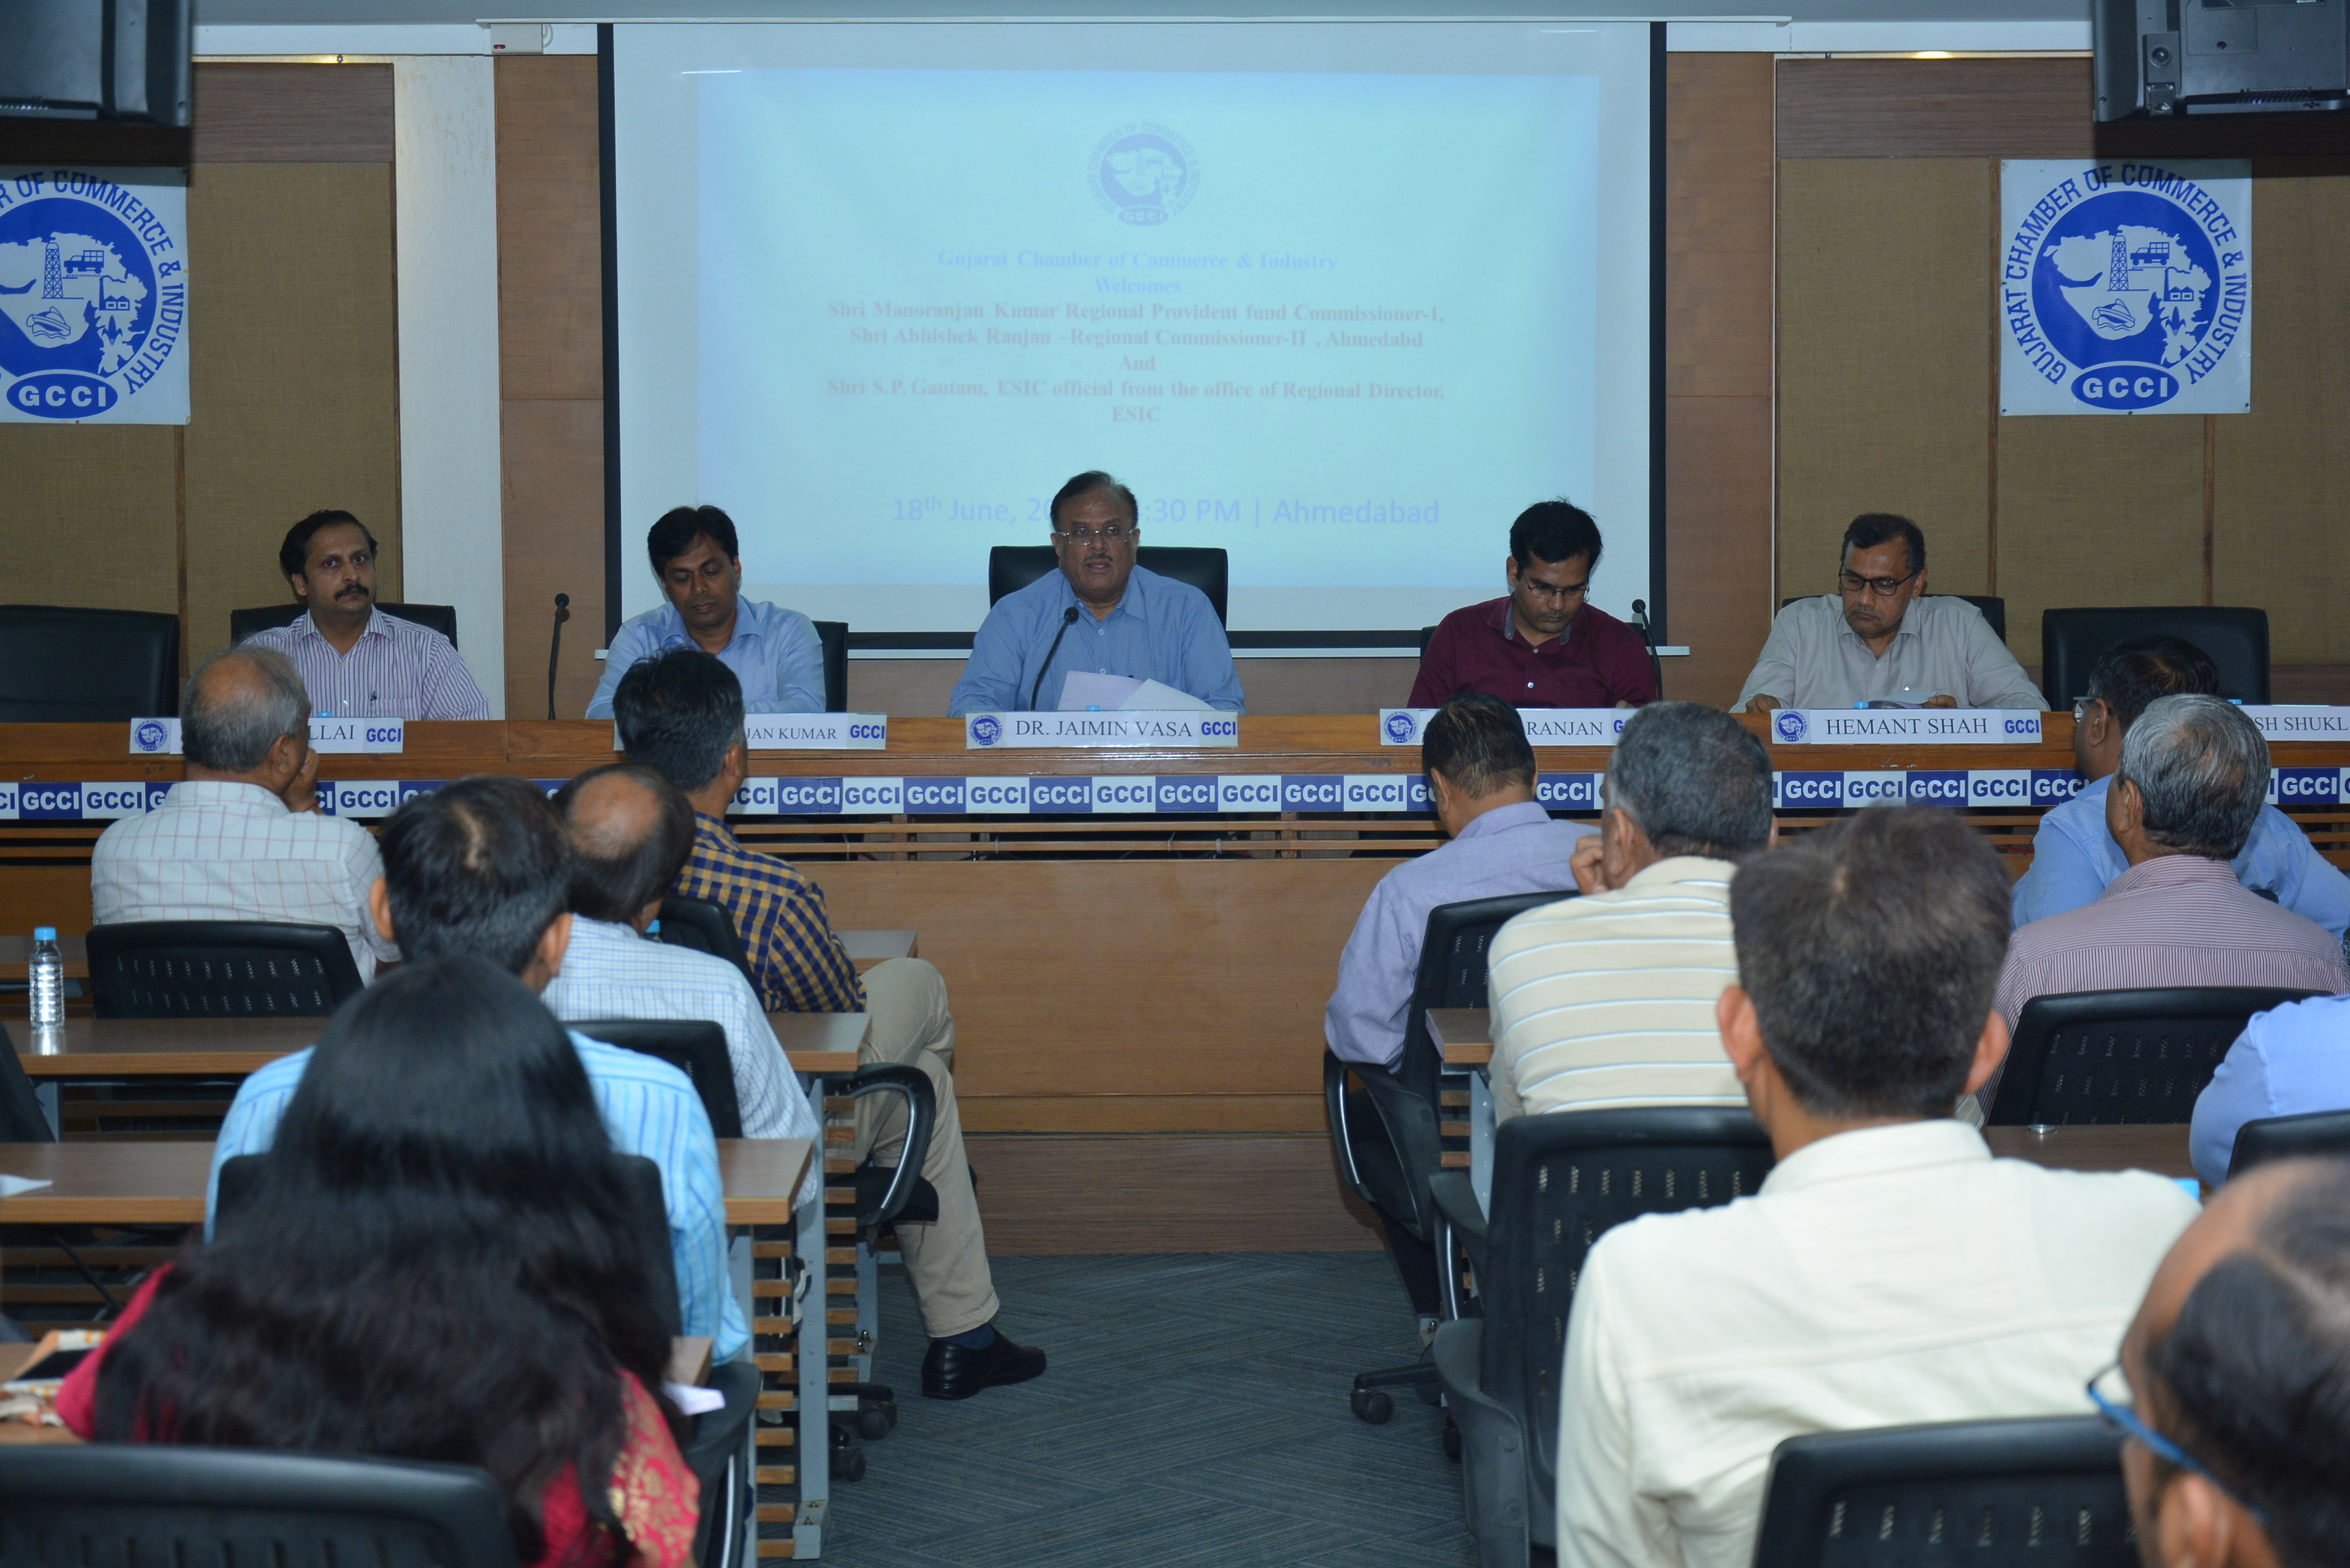 Interactive Session with Regional P.F. Commissioner & Asst. Director of ESIC